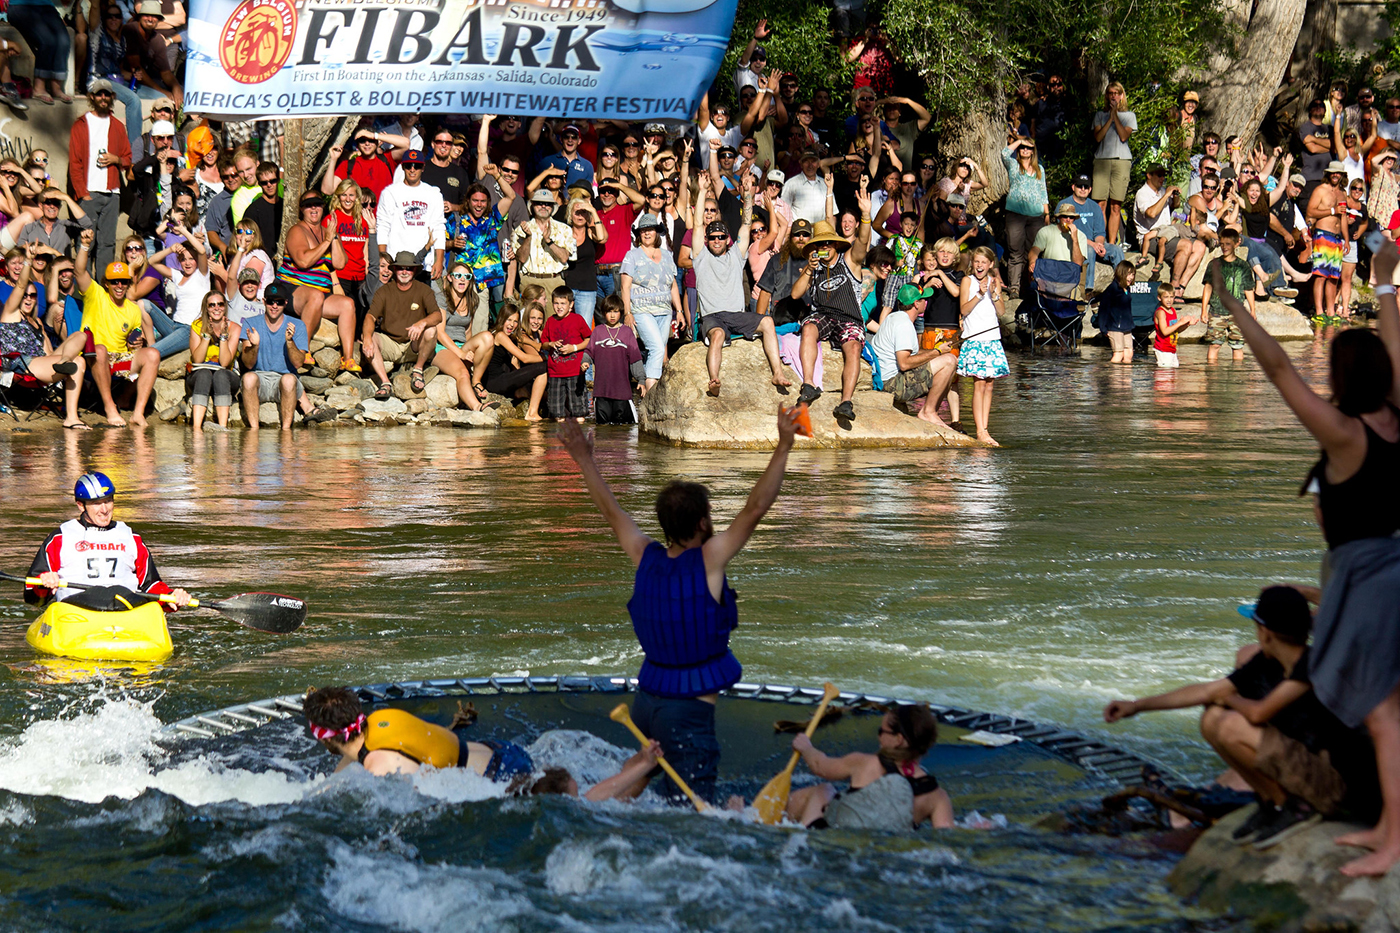 A team member celebrates after grabbing a prize bag in the Hooligan Race at the 2012 FIBArk Whitewater Festival.